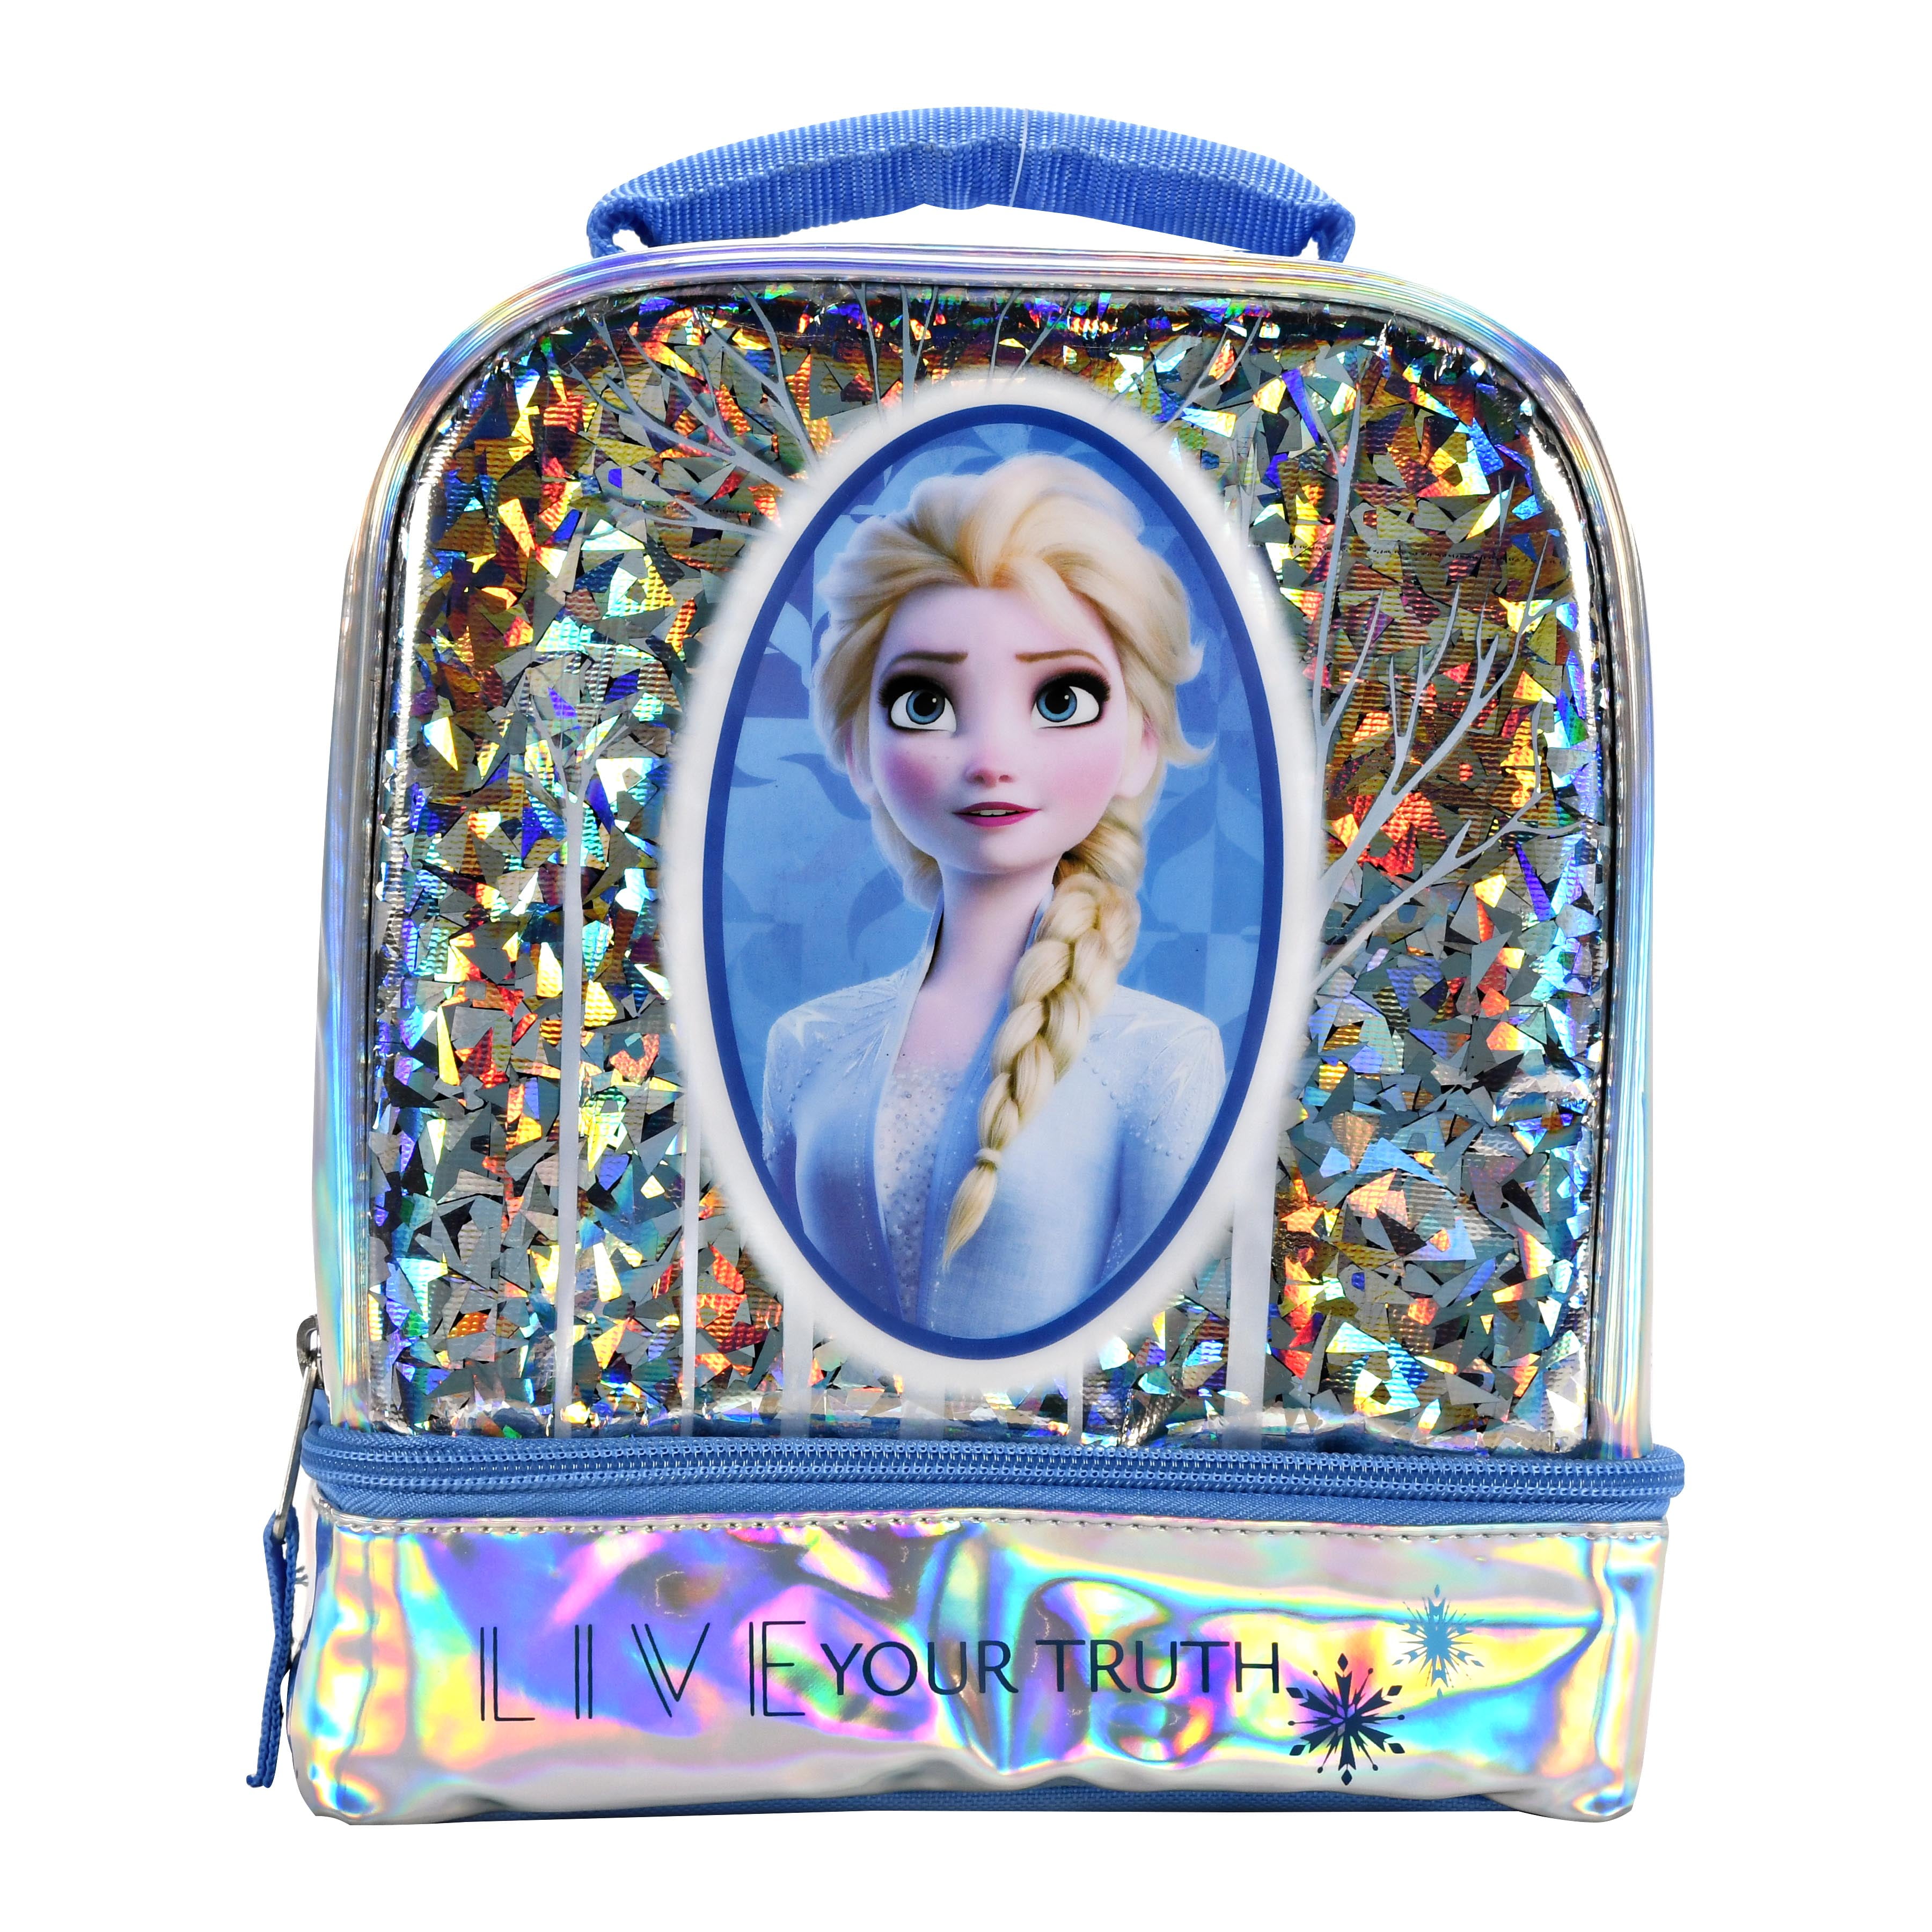 Elsa Plush Doll 19 Inches Tall Disney Paper Tote Bag Rope Handle 5 Assorted Stickers 3 Piece Bundle Frozen